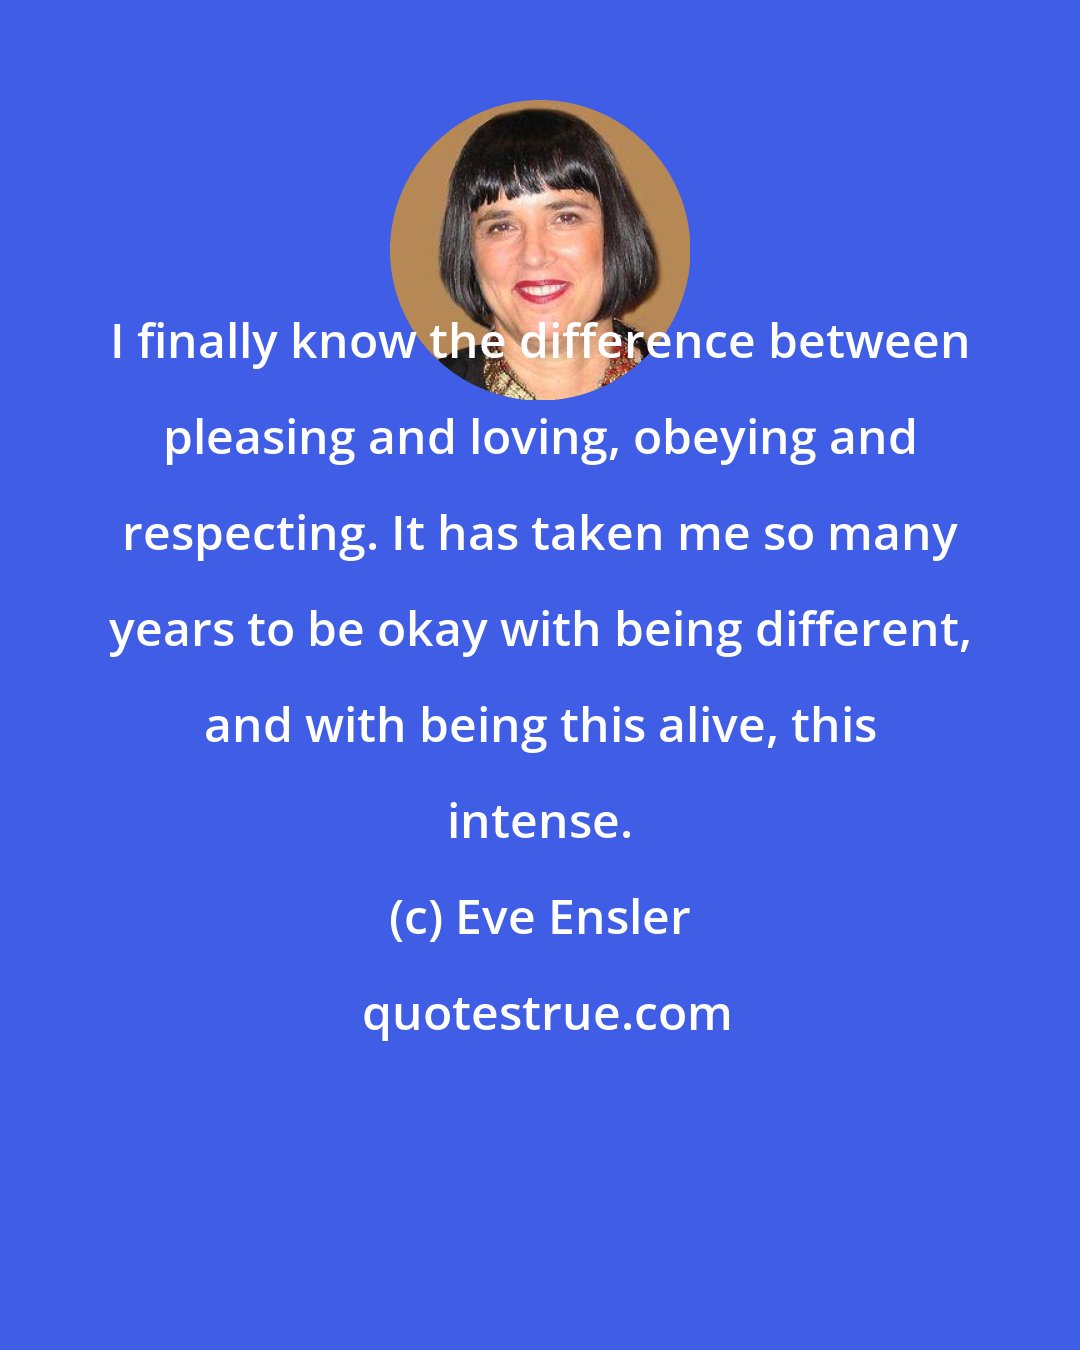 Eve Ensler: I finally know the difference between pleasing and loving, obeying and respecting. It has taken me so many years to be okay with being different, and with being this alive, this intense.